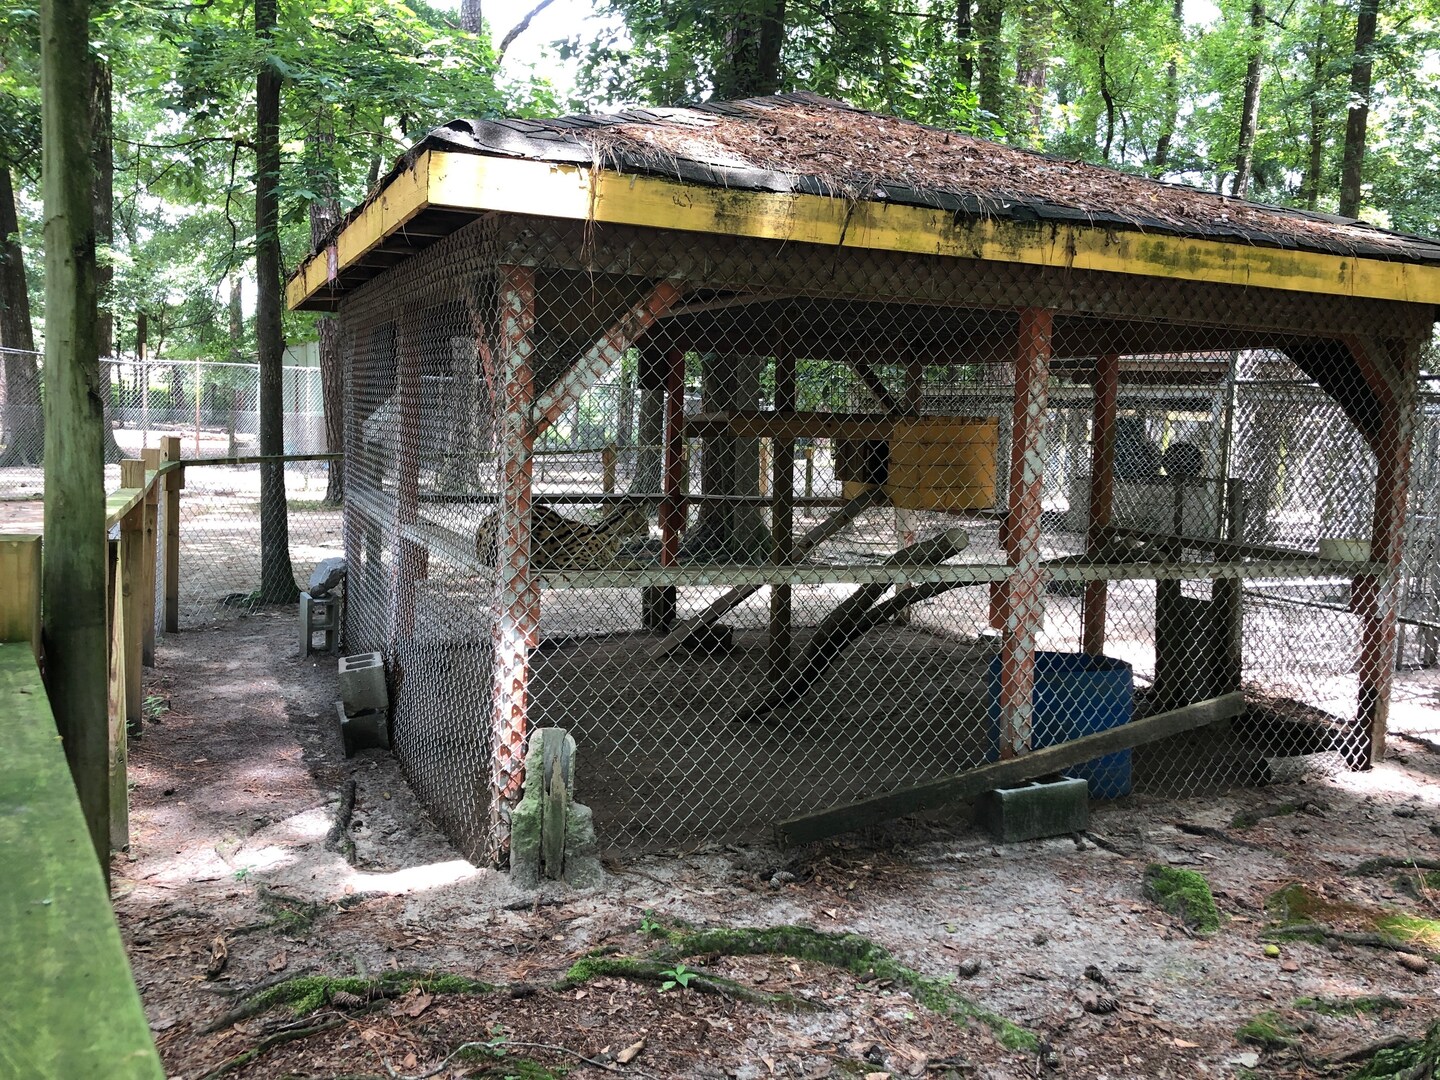 ‘Worst roadside zoo in the country’ closed for good after PETA lawsuit